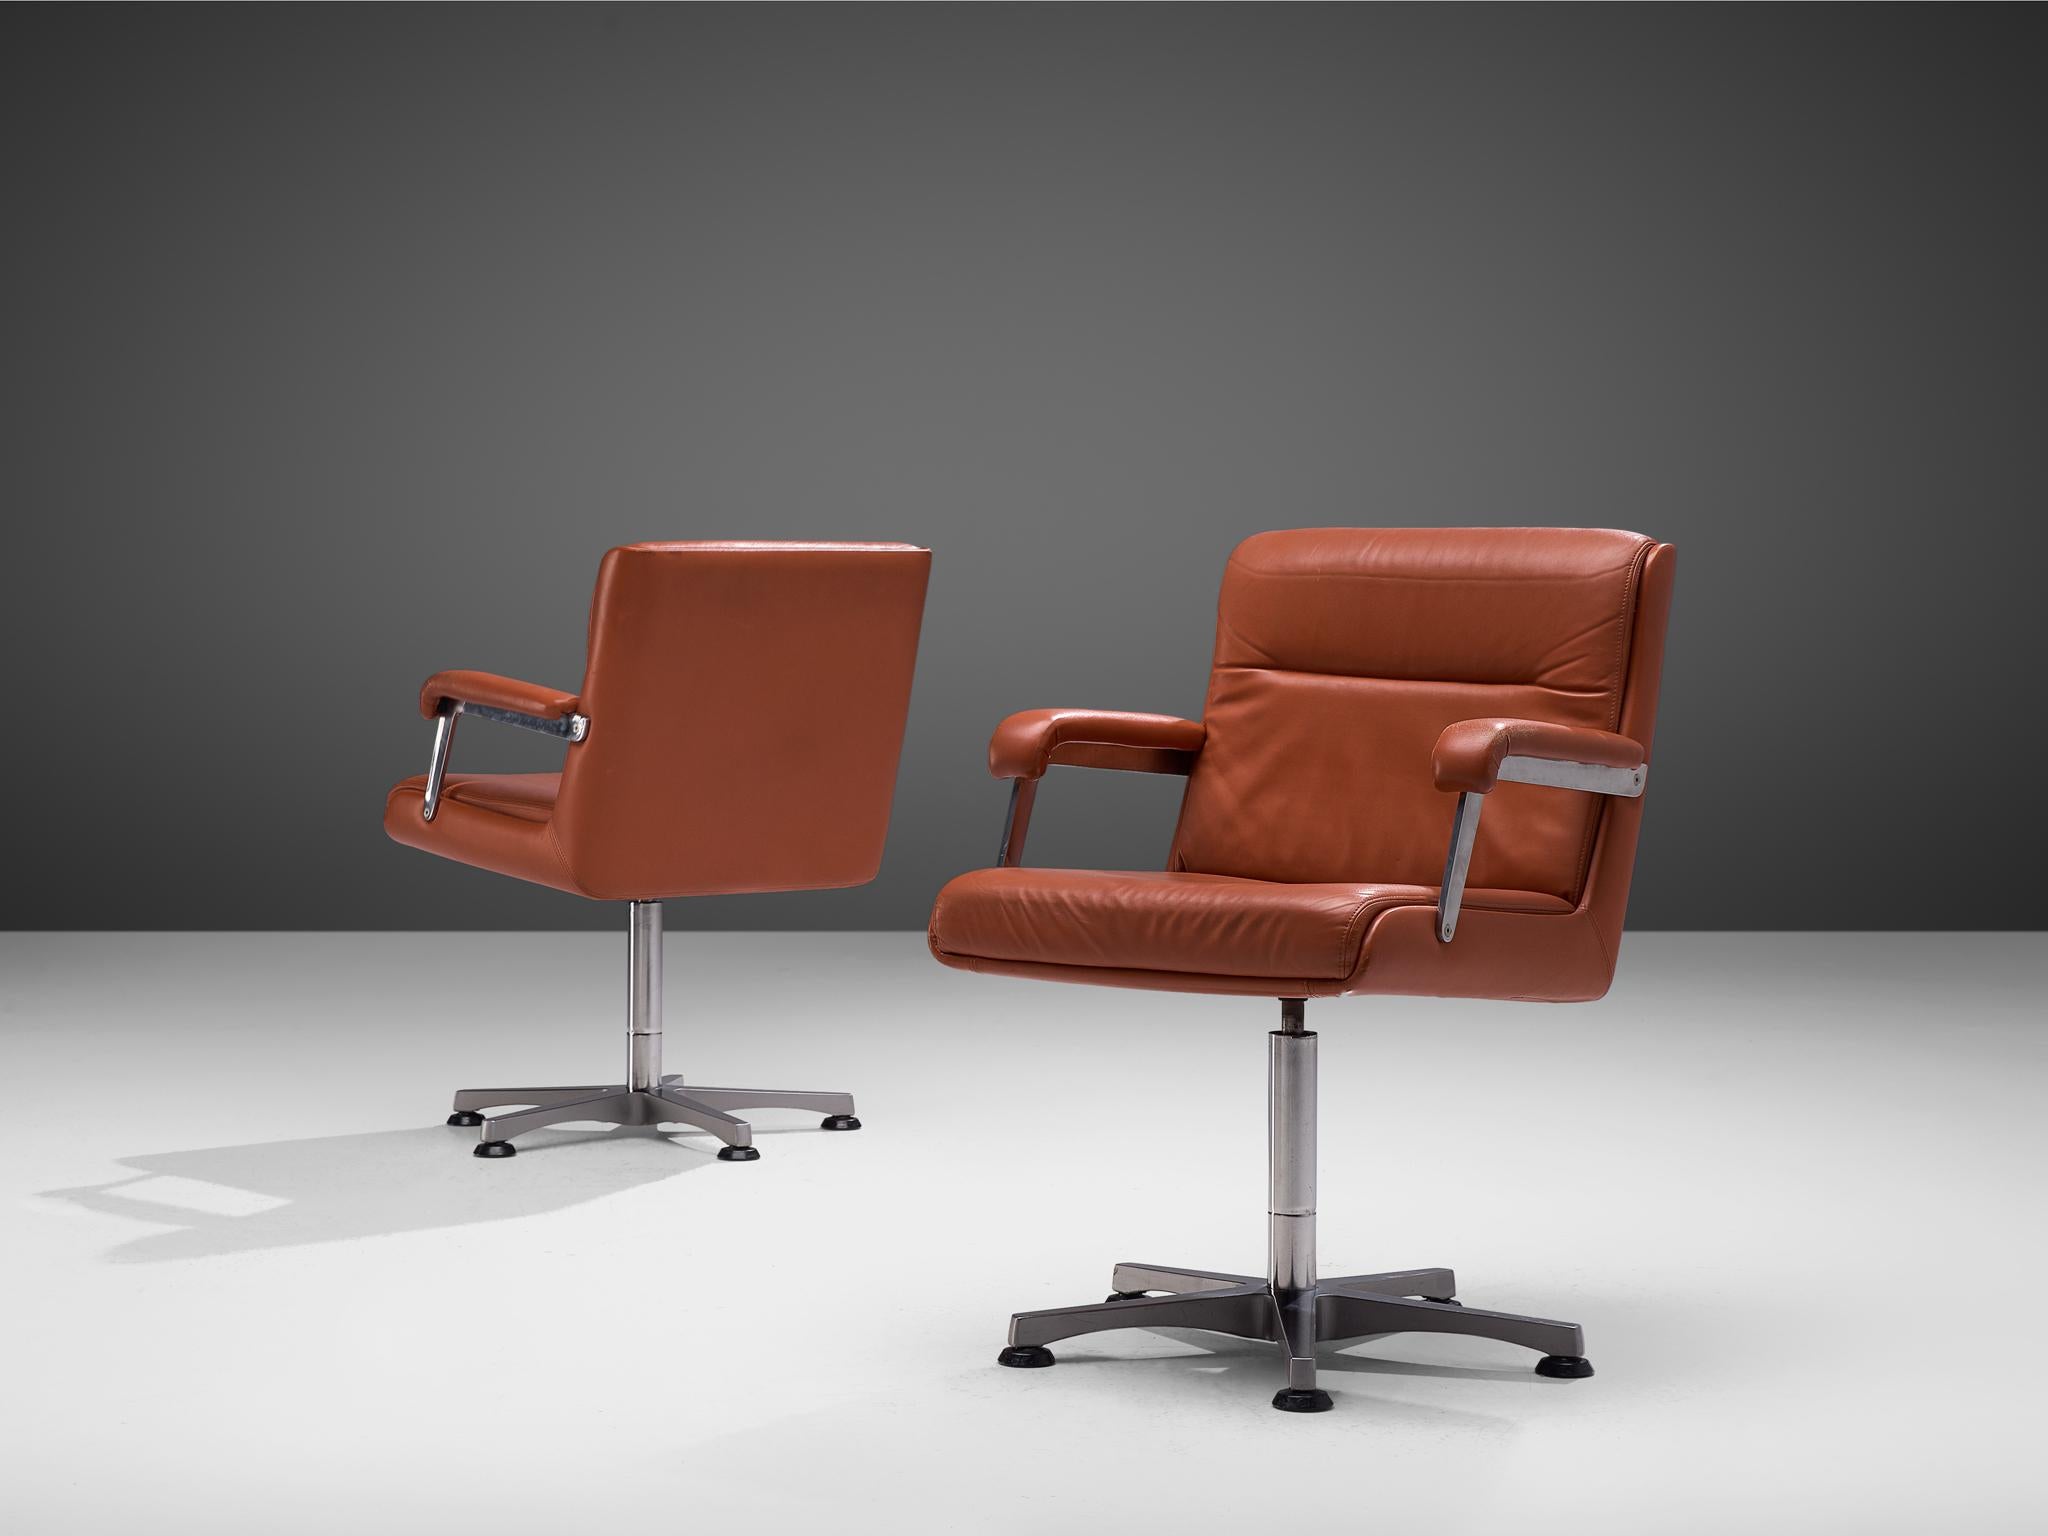 Six Norwegian Office Chairs In Terracotta Leather For Sale At 1stdibs